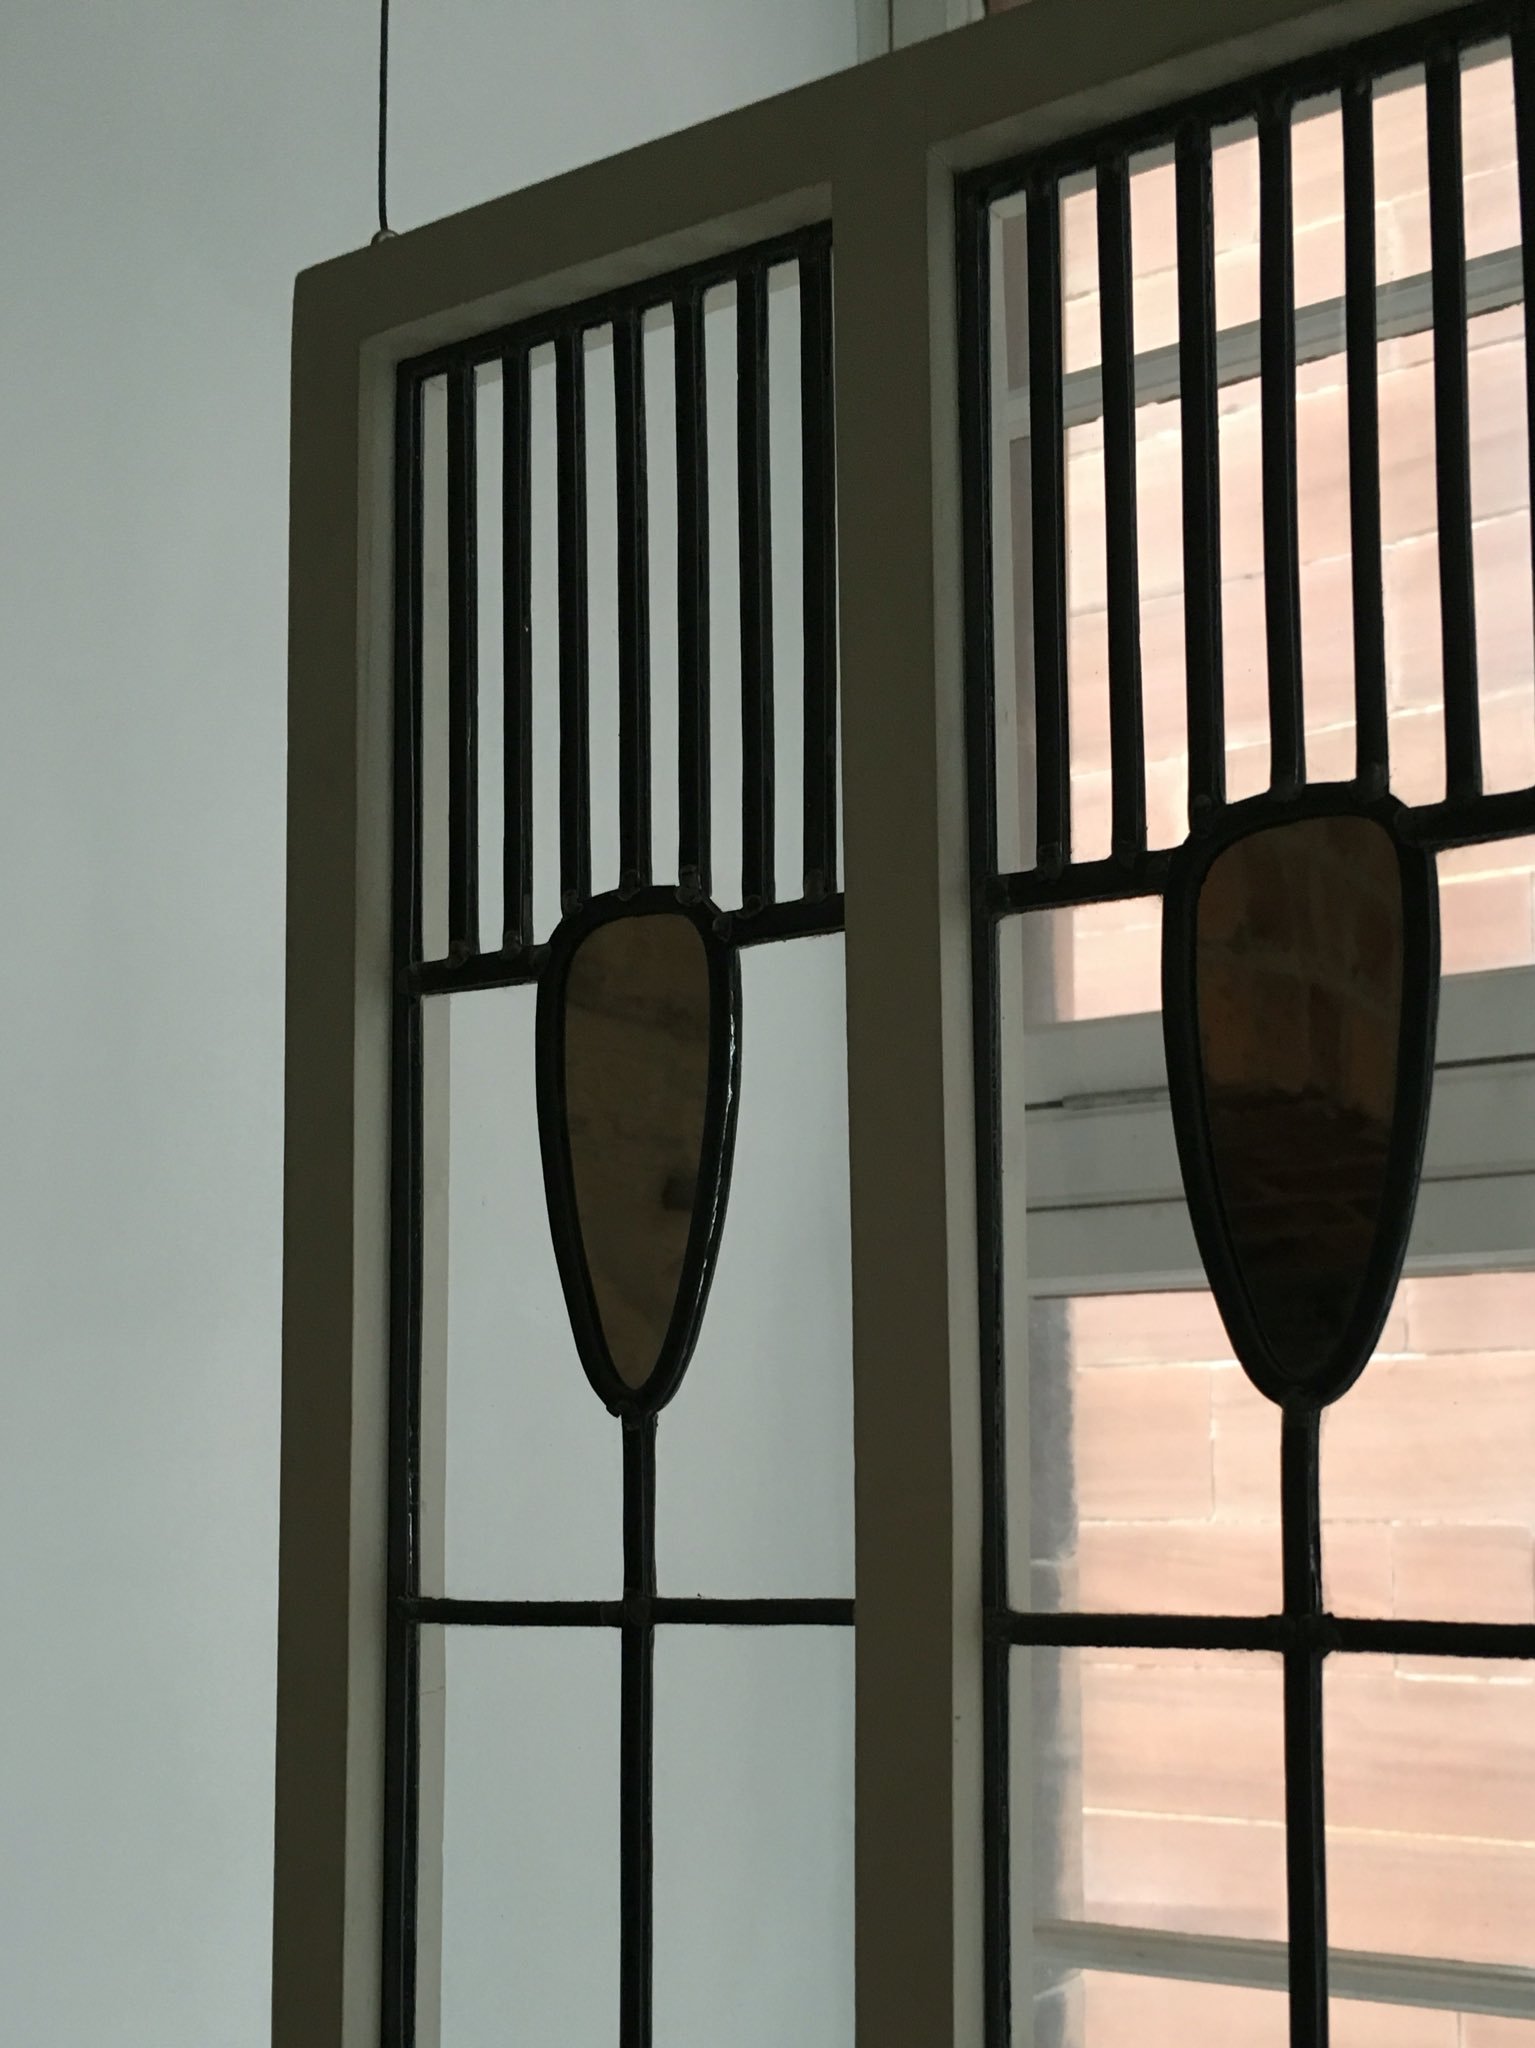 Understanding Mackintosh as a form of modern design that is not minimalist straight lines, more humanist # https://t.co/BYSOtDcVN5